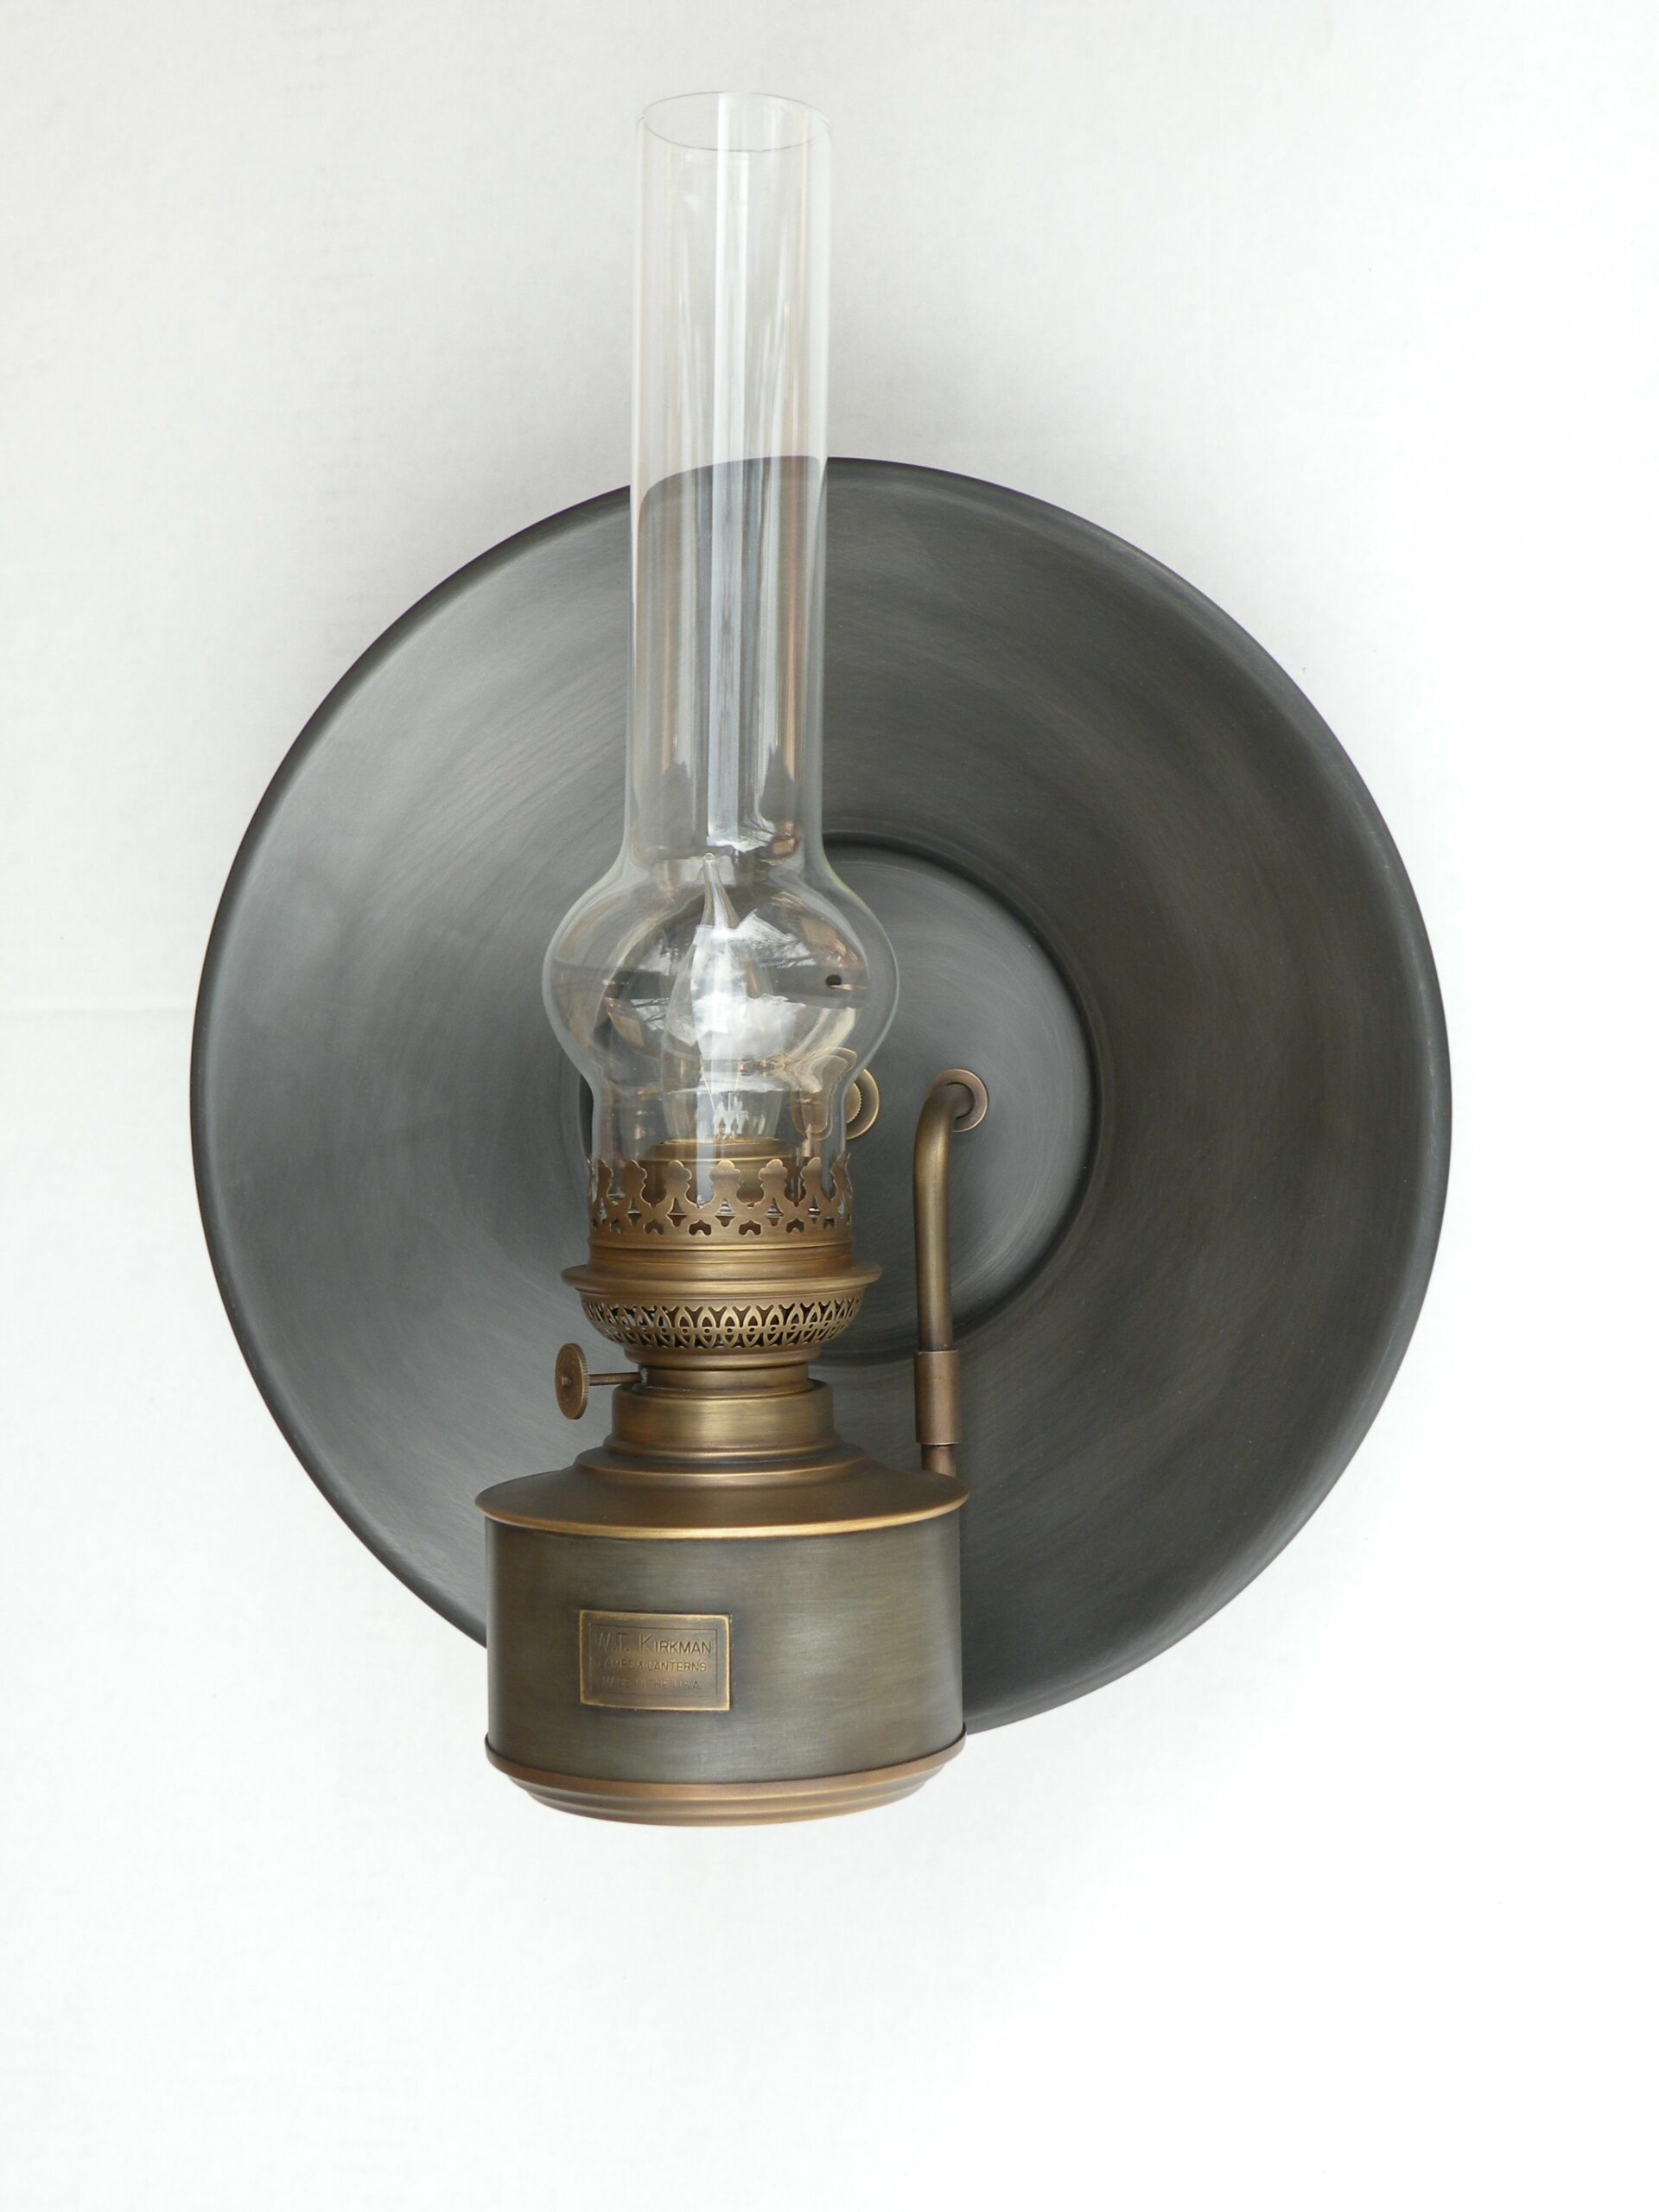 W.T. Kirkman Gold Pan Reflector Lamp - The Source for Oil Lamps and Hurricane Lanterns